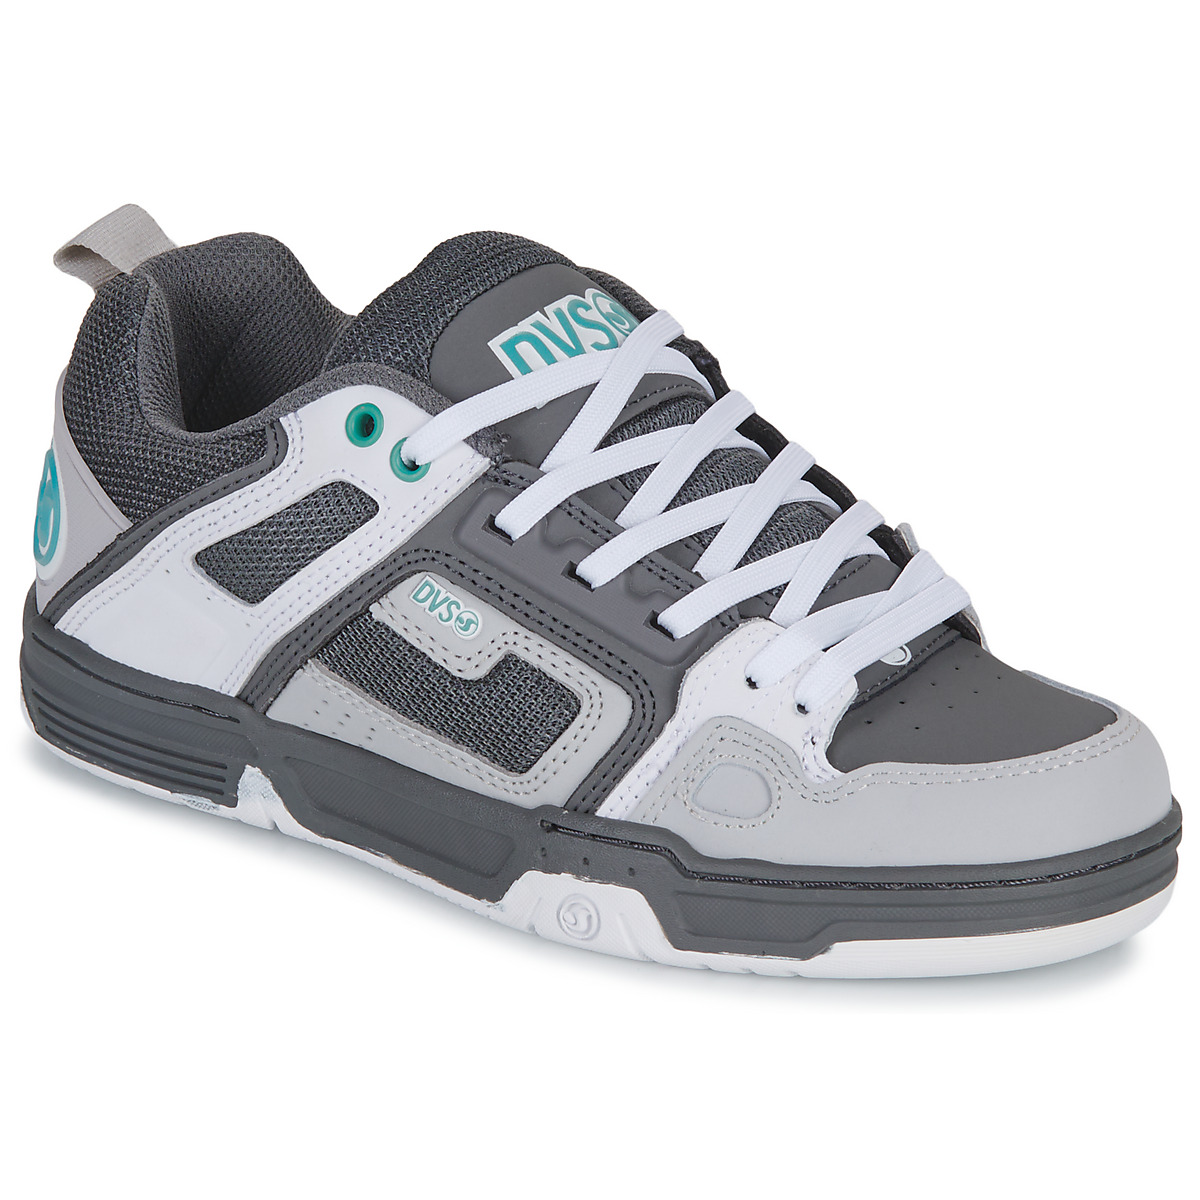 DVS COMANCHE White Grey Blue Free delivery Spartoo UK Shoes  Skate shoes £ 76.80